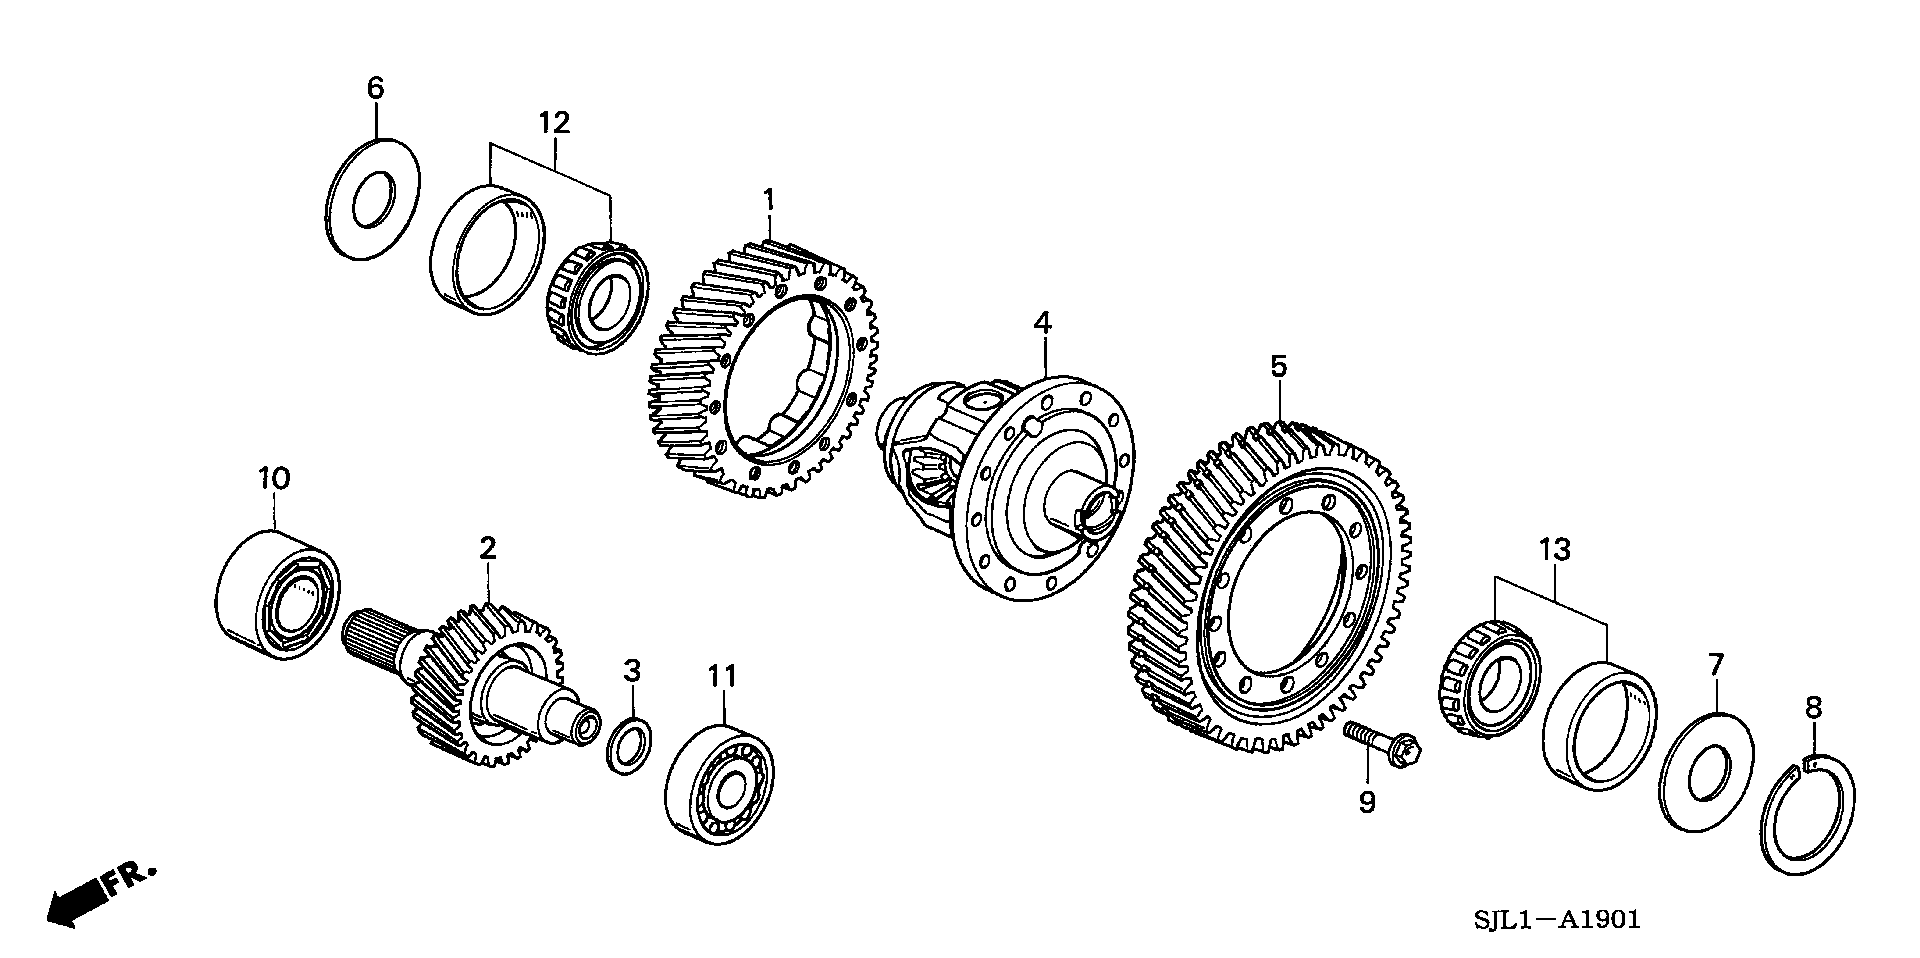 DIFFERENTIAL(4WD)(V6)